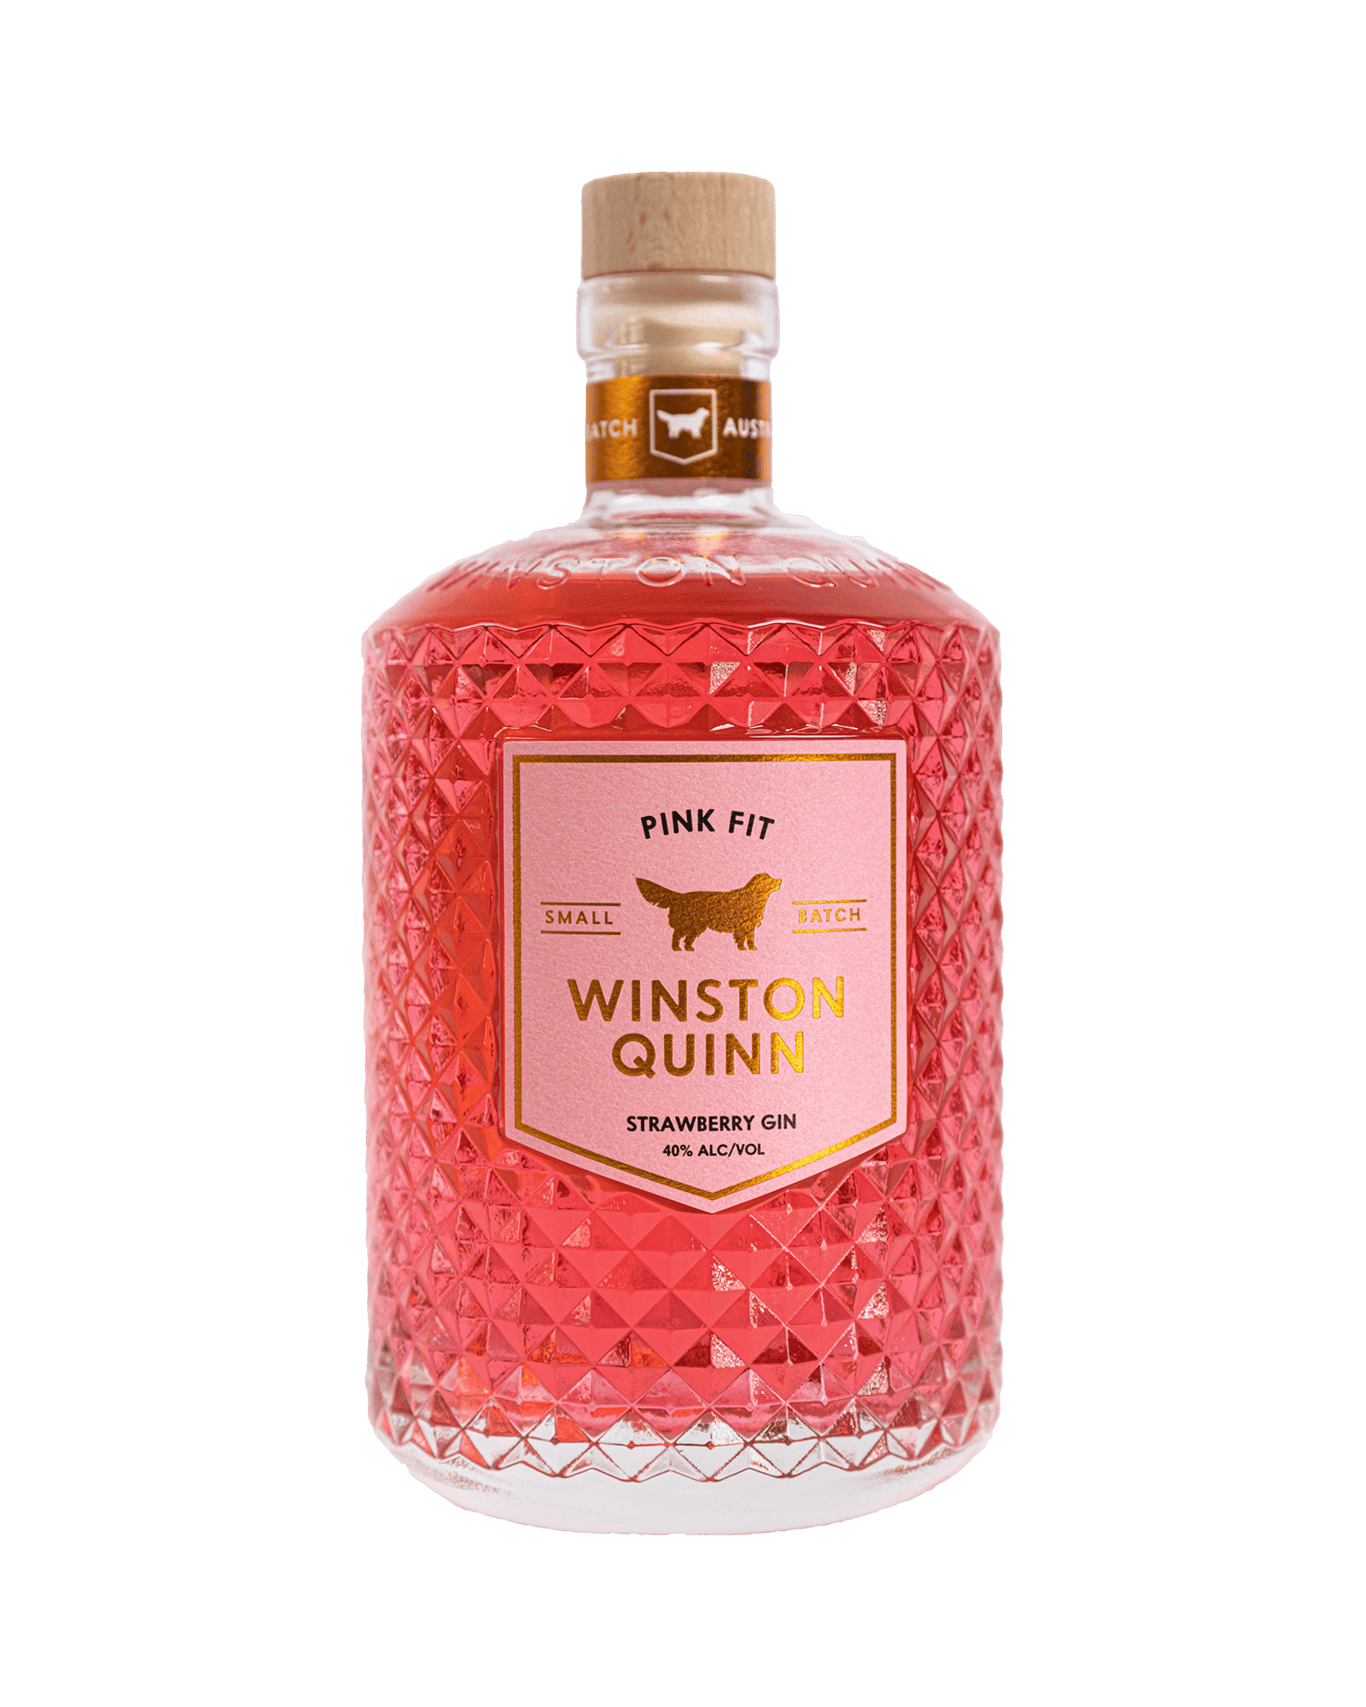 Winston Quinn Pink Fit Strawberry Gin 700ml Unbeatable Prices Buy Online Best Deals With